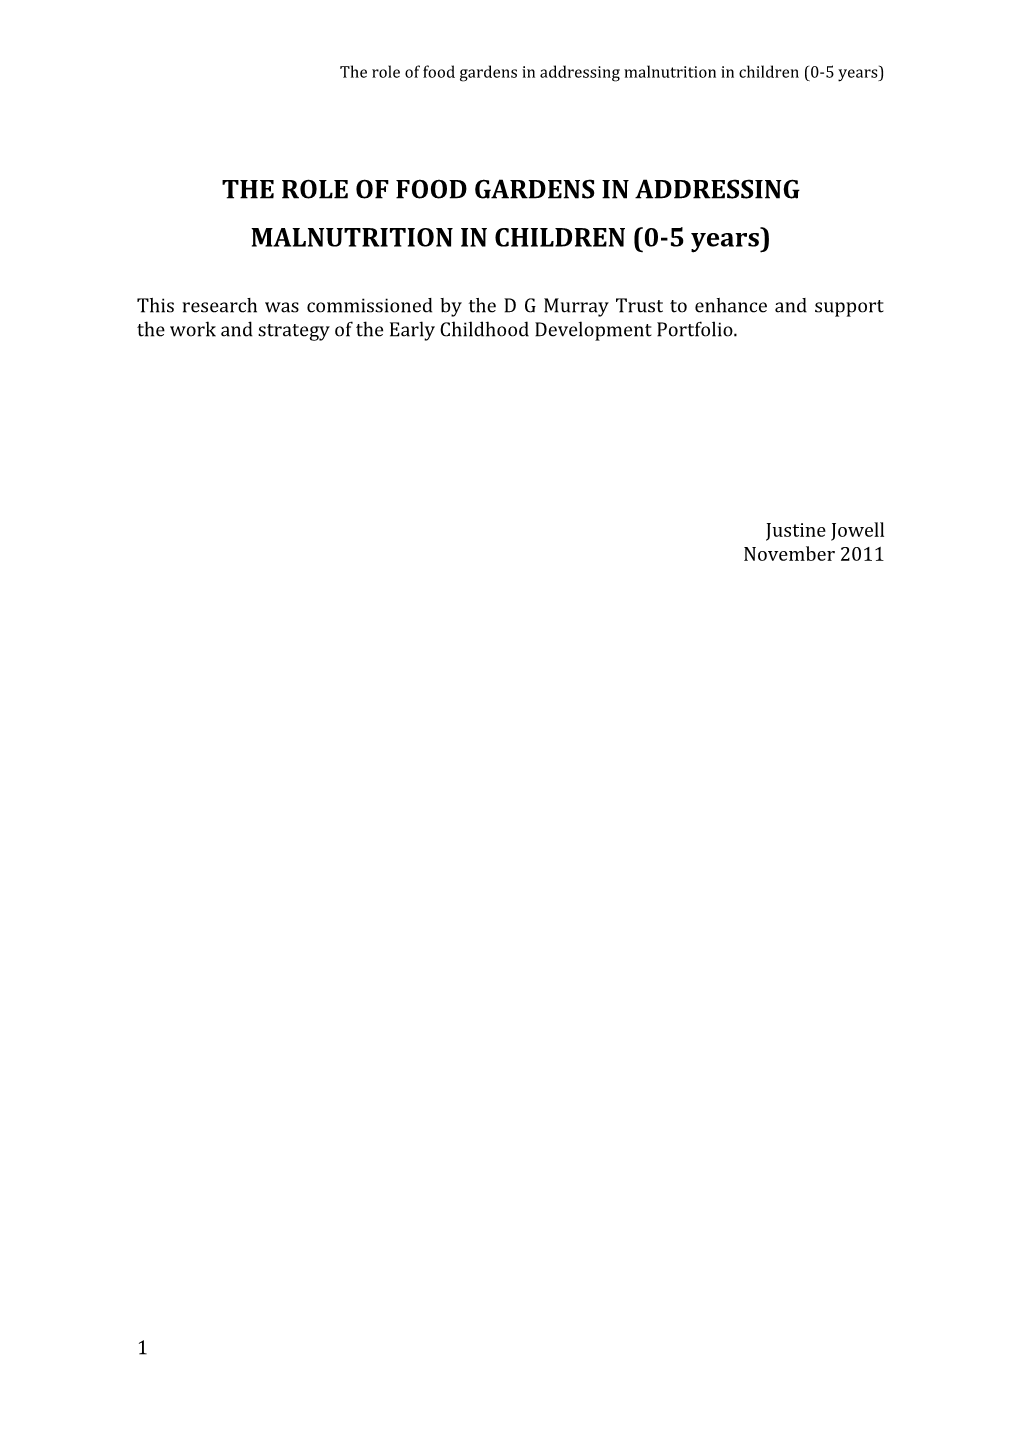 THE ROLE of FOOD GARDENS in ADDRESSING MALNUTRITION in CHILDREN (0-5 Years)